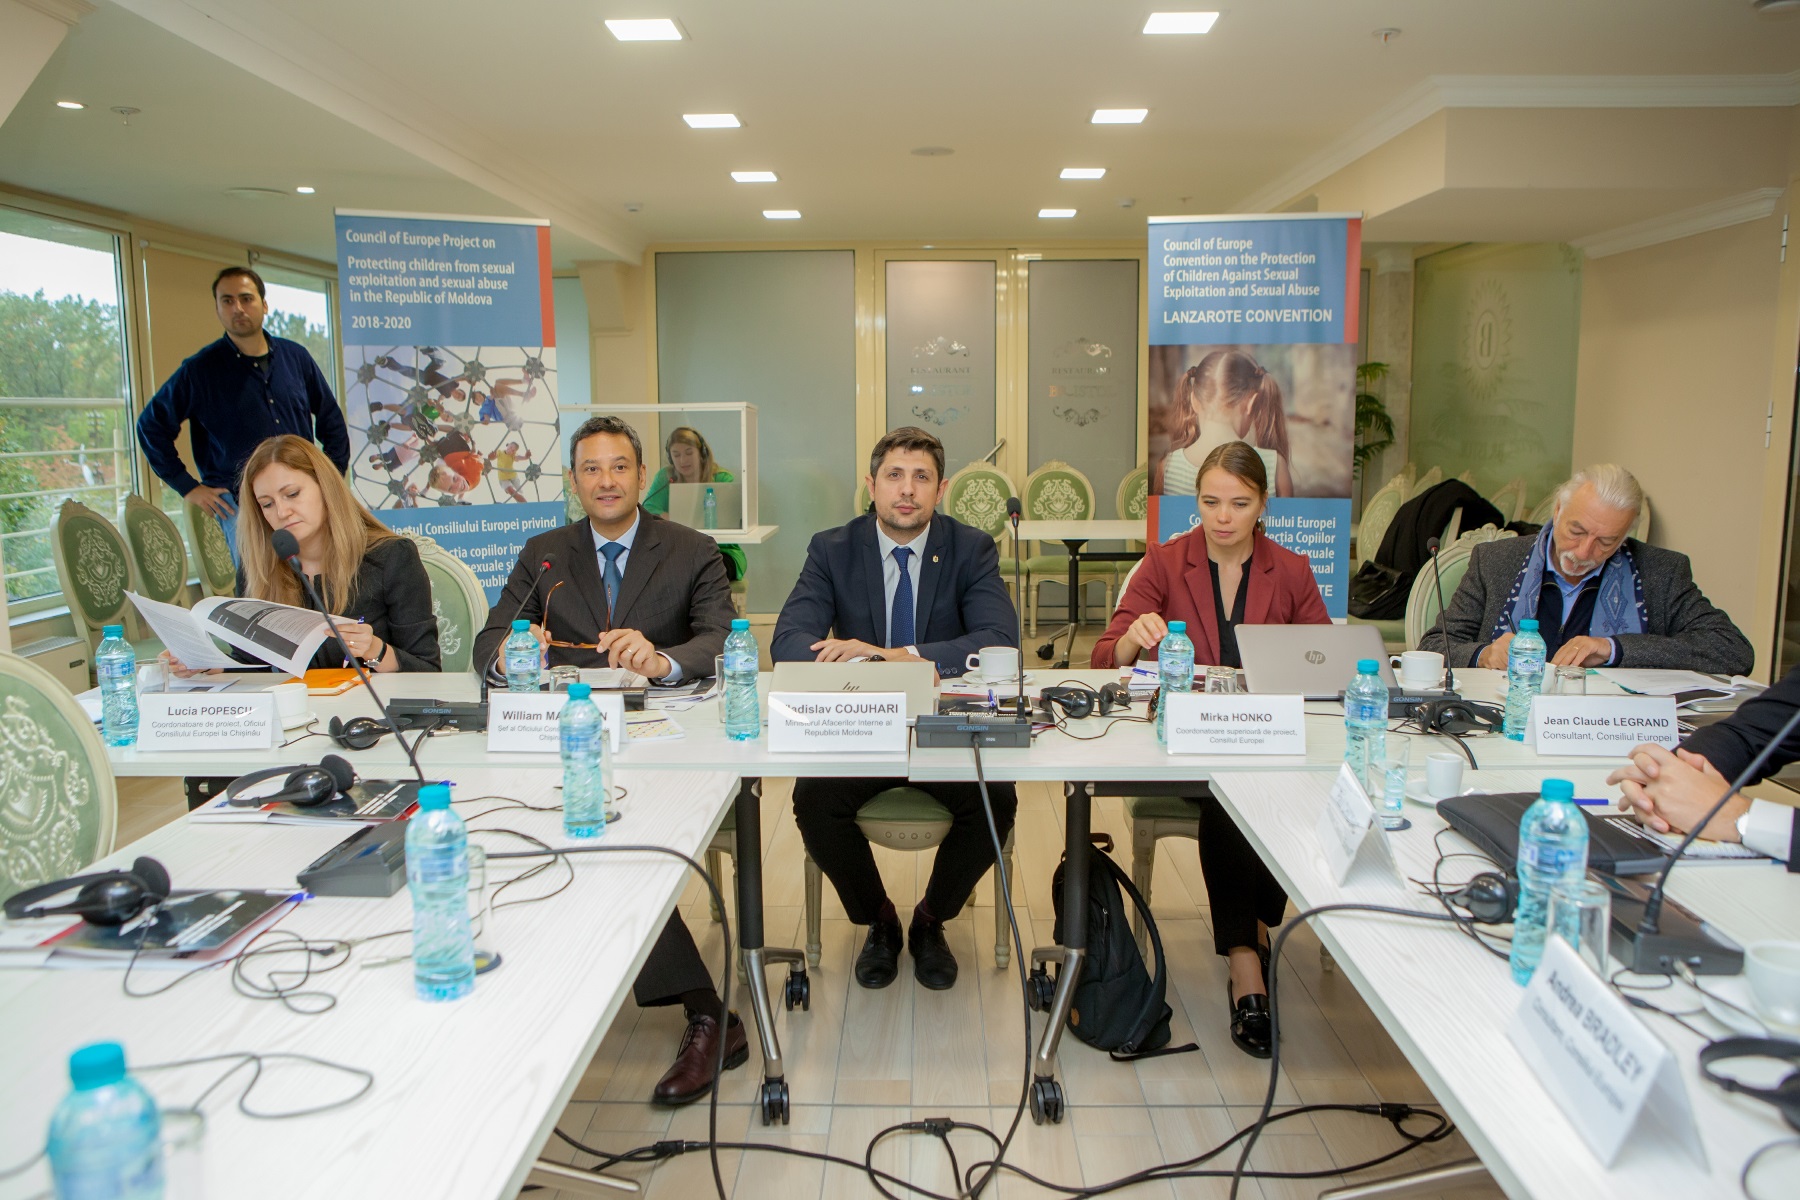 Council of Europe presents the achievements and future plans of the project